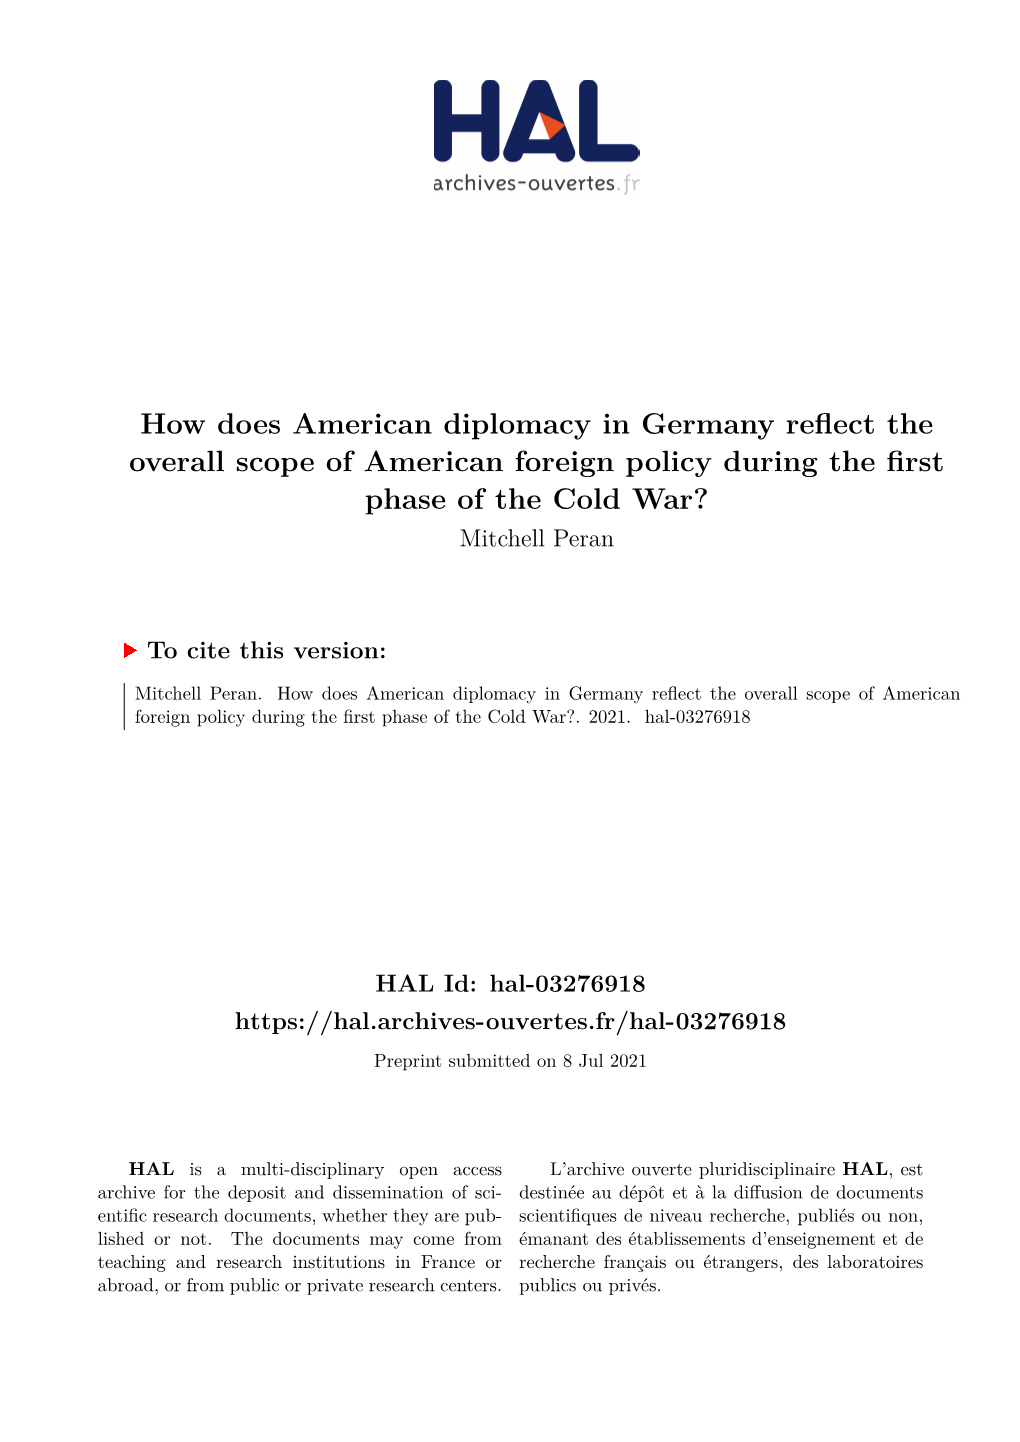 How Does American Diplomacy in Germany Reflect the Overall Scope of American Foreign Policy During the First Phase of the Cold War? Mitchell Peran